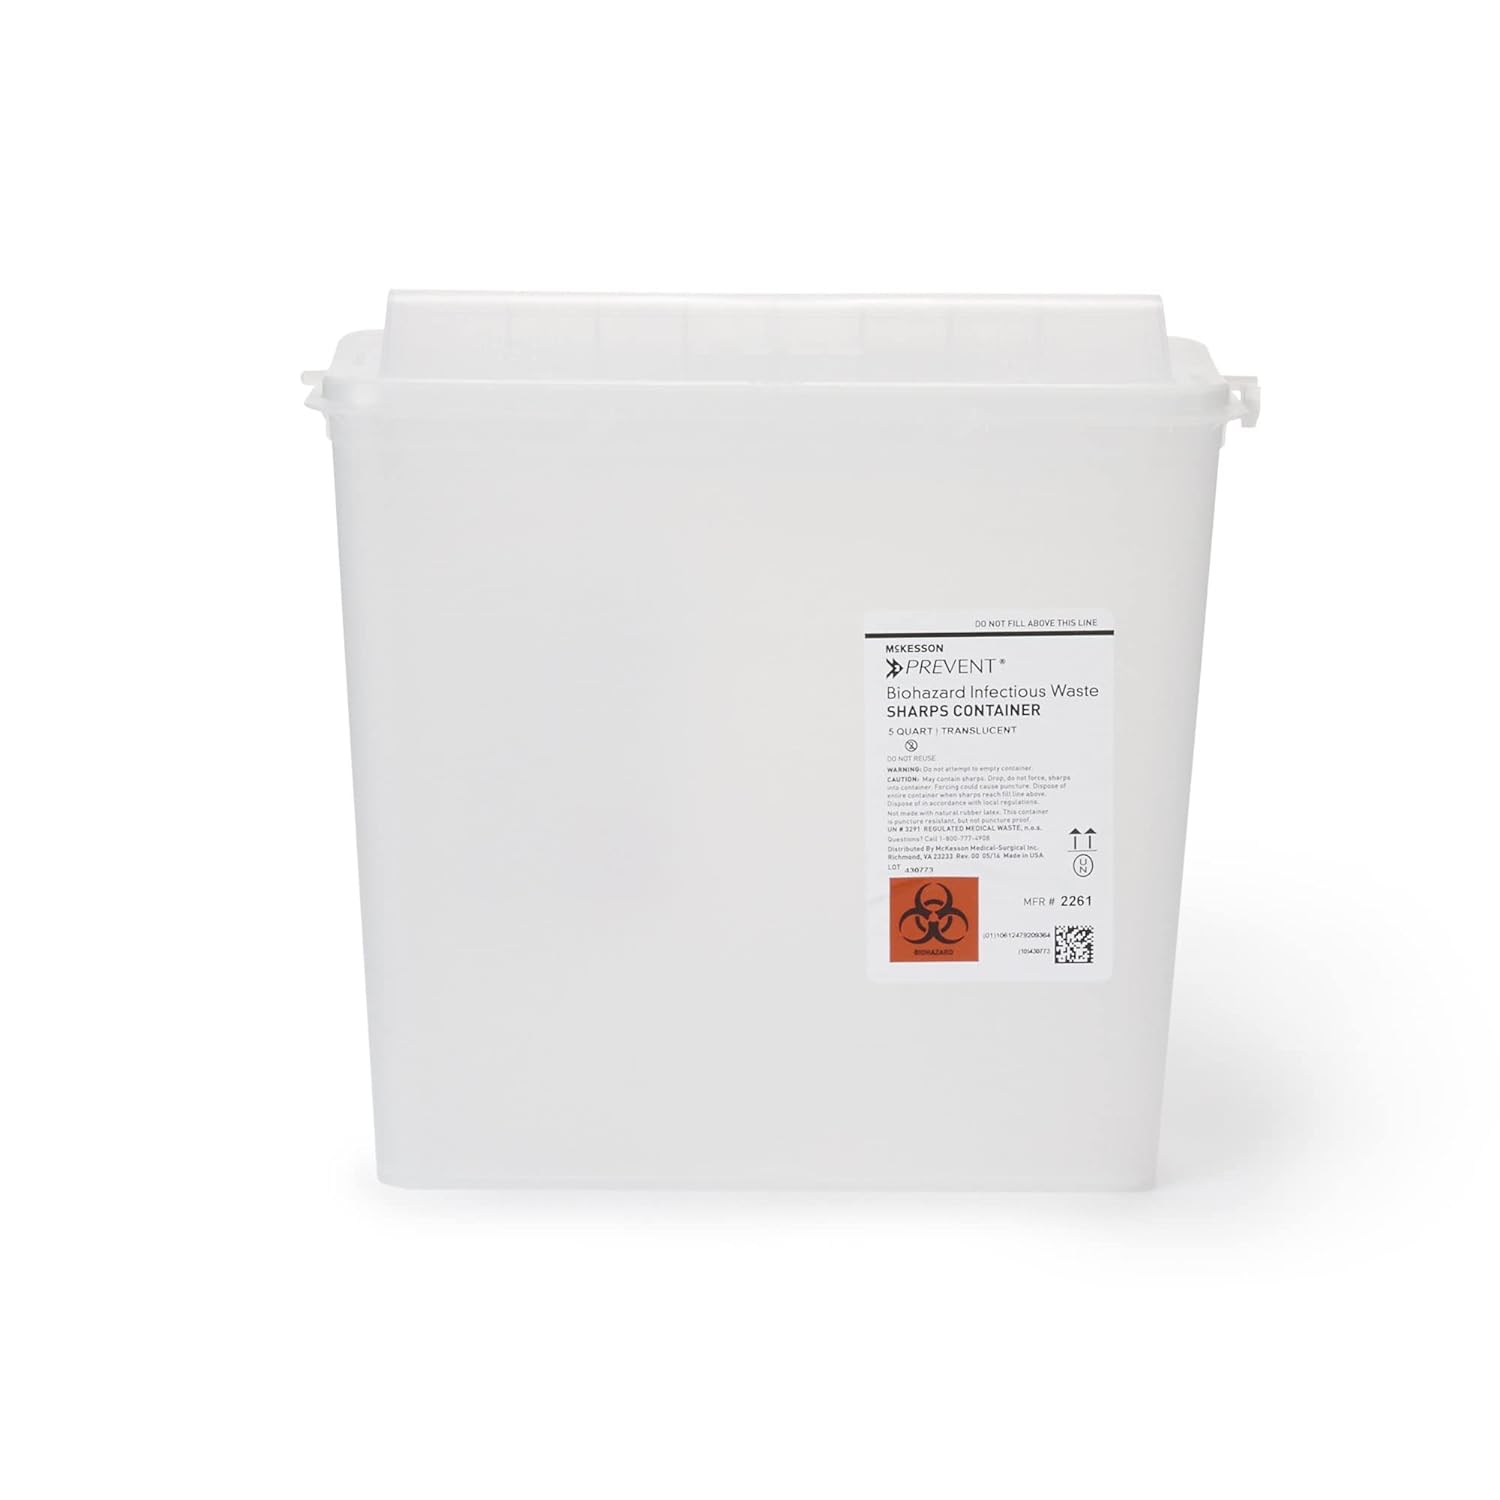 McKesson Prevent Sharps Container - Plastic, Horizontal Entry, Counter-Balanced Door Lid - White, 1.25 gal, 10 1/2 in x 4 3/4 in x 10 3/4 in, 1 Count